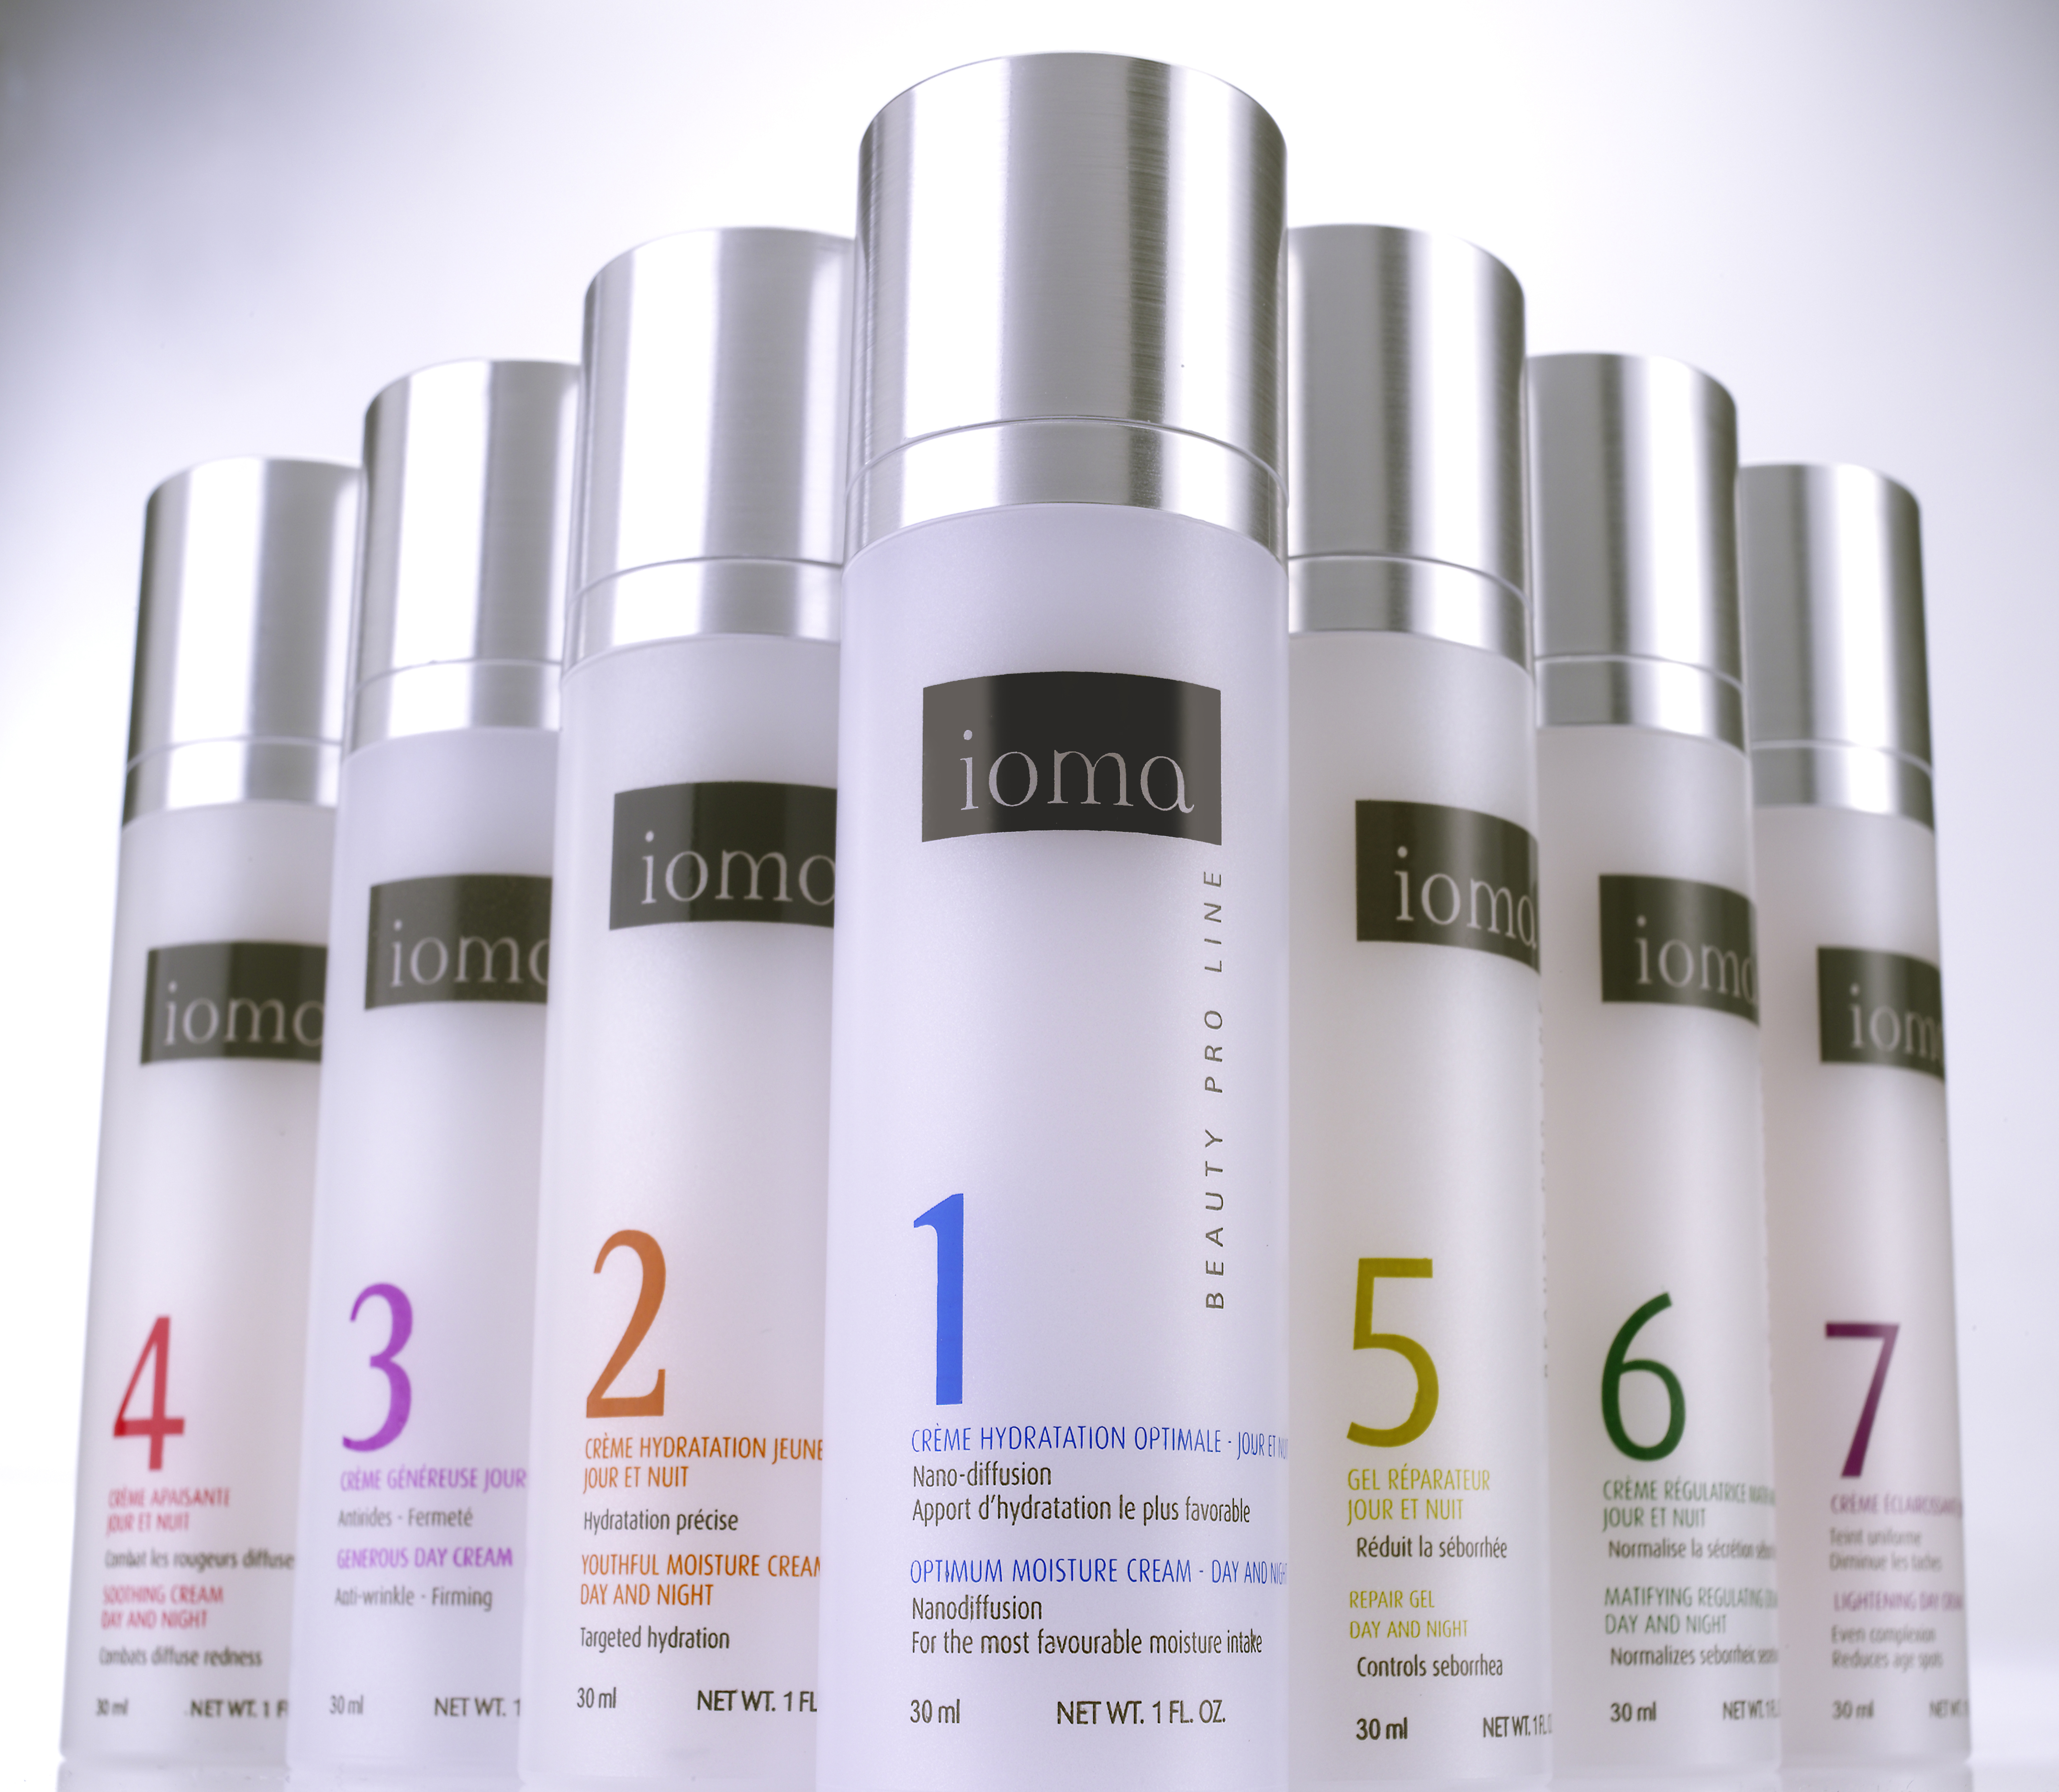 Customized Skincare that Corrects Individual Imperfections â IOMA Paris